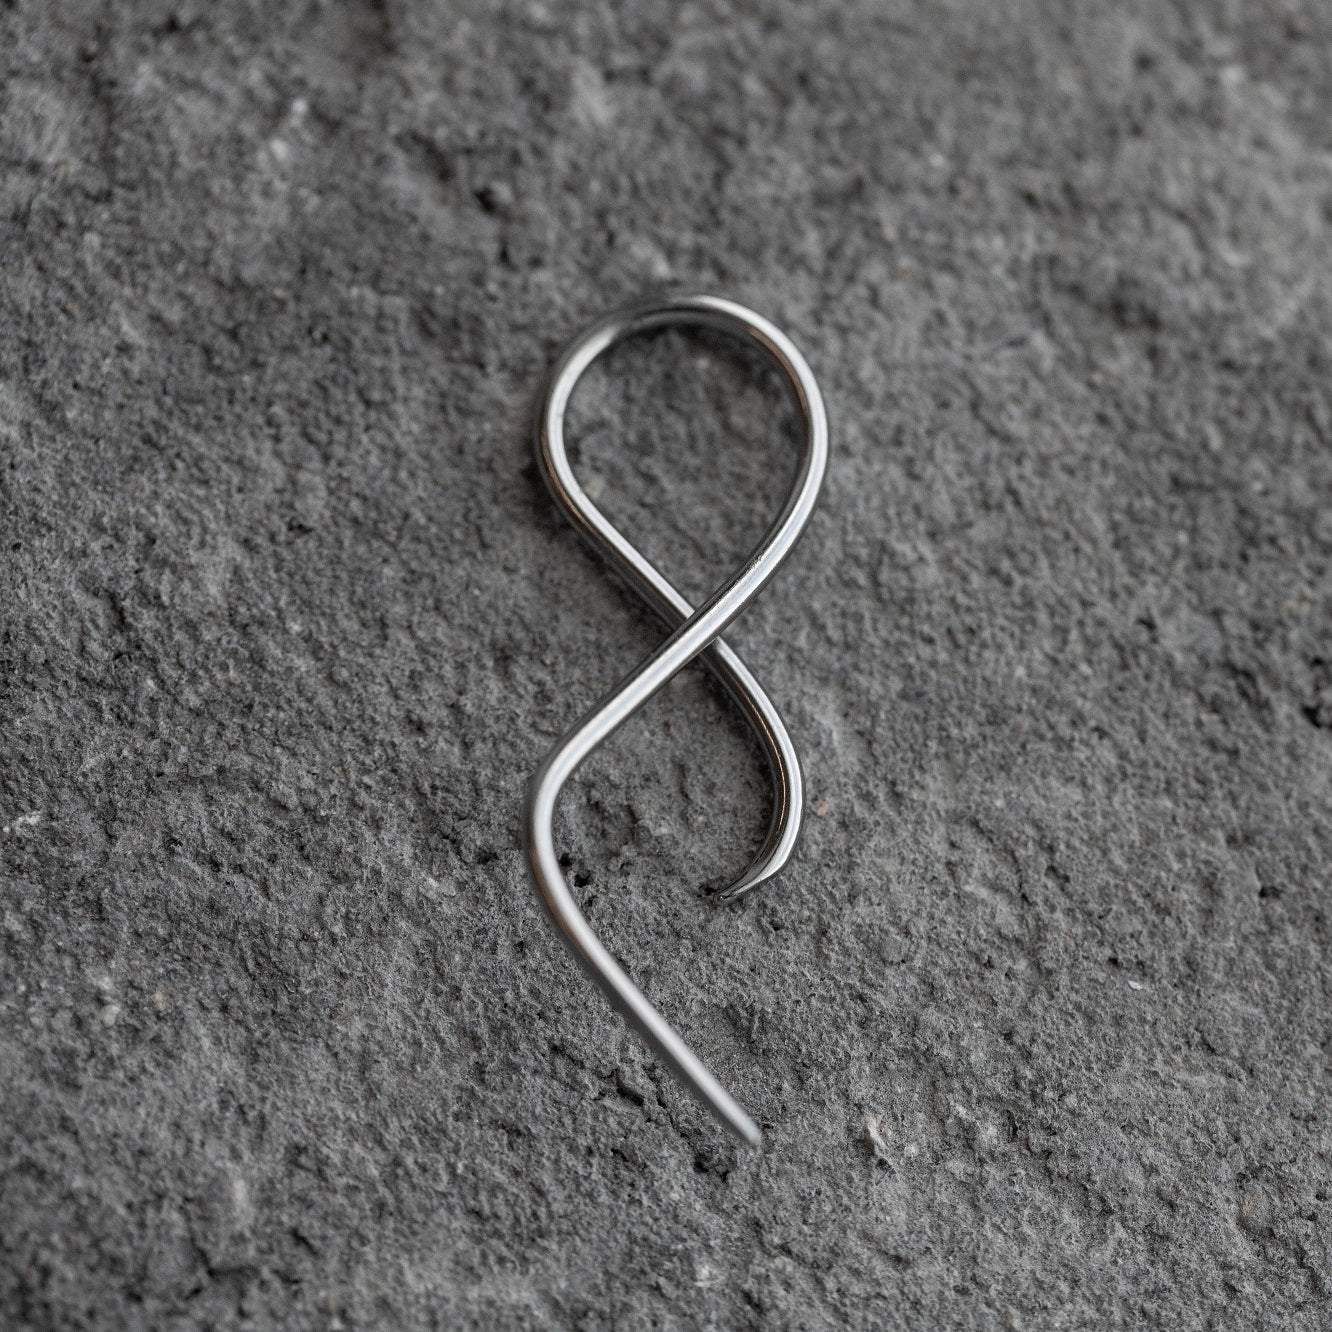 Twisted Tail Taper Earrings - 316L Surgical Steel